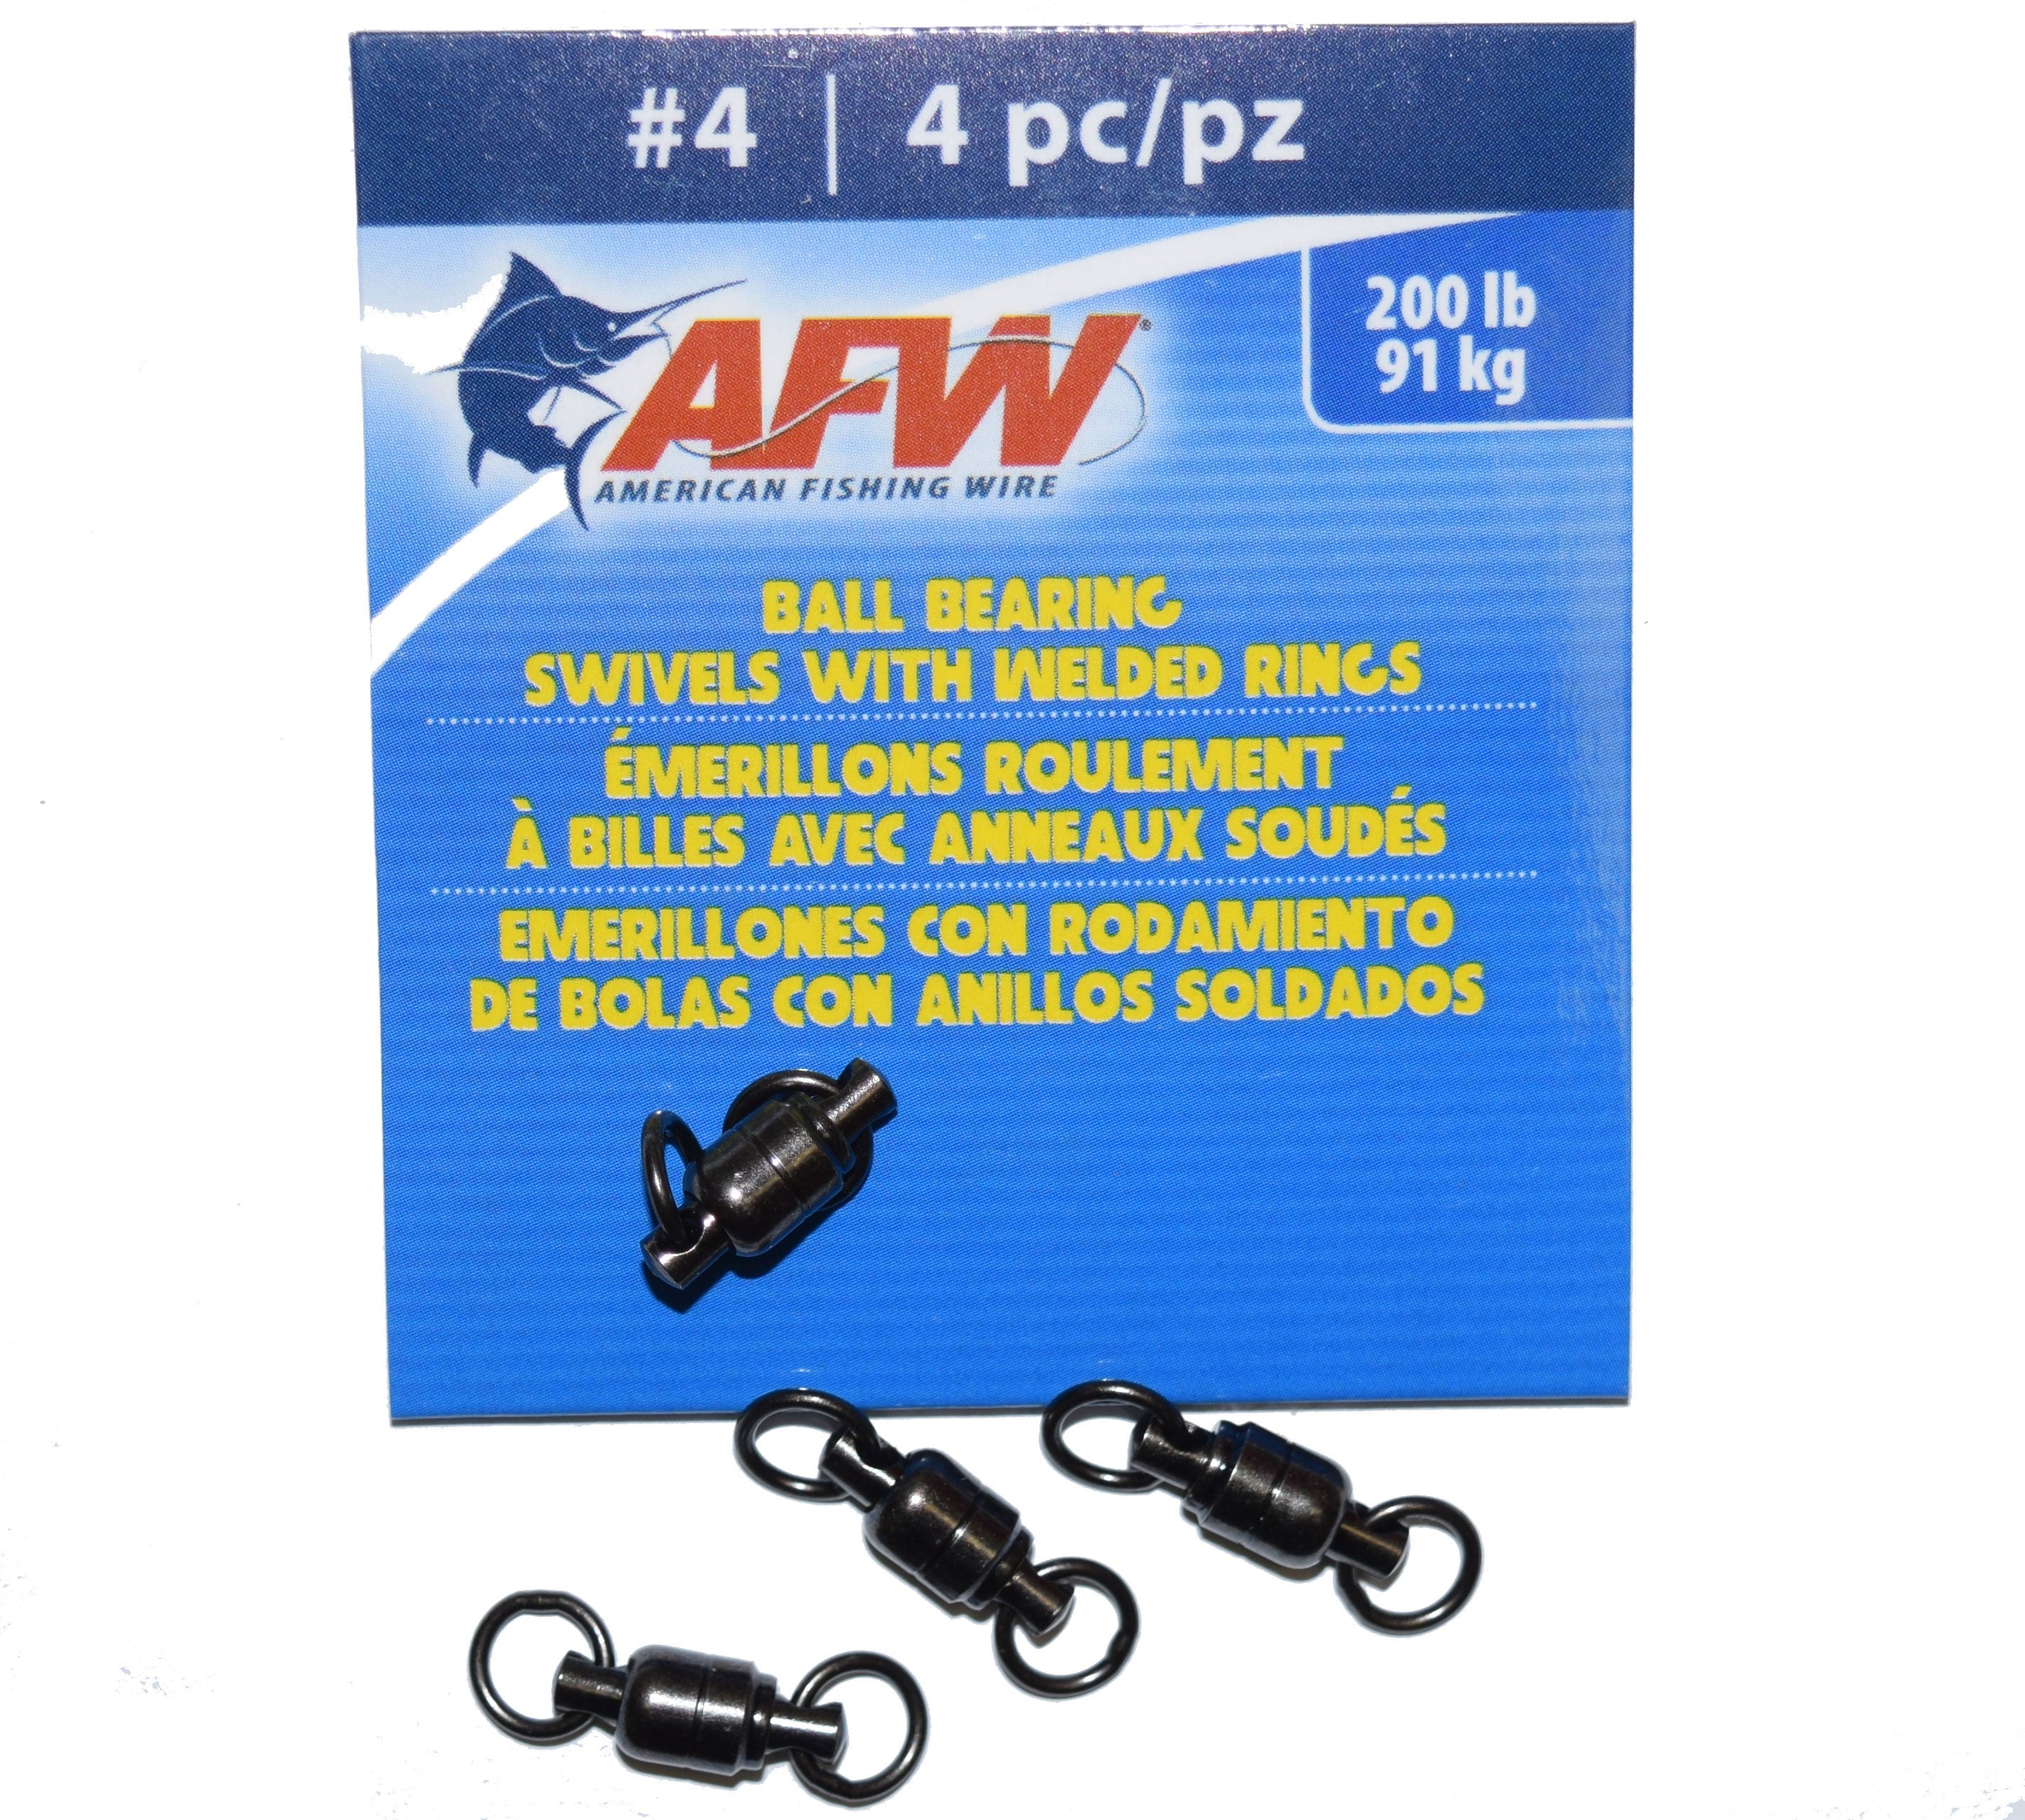 American Fishing Wire Black Ball Bearing Swivels (4 Pieces), Size 4, 200 Pound Test